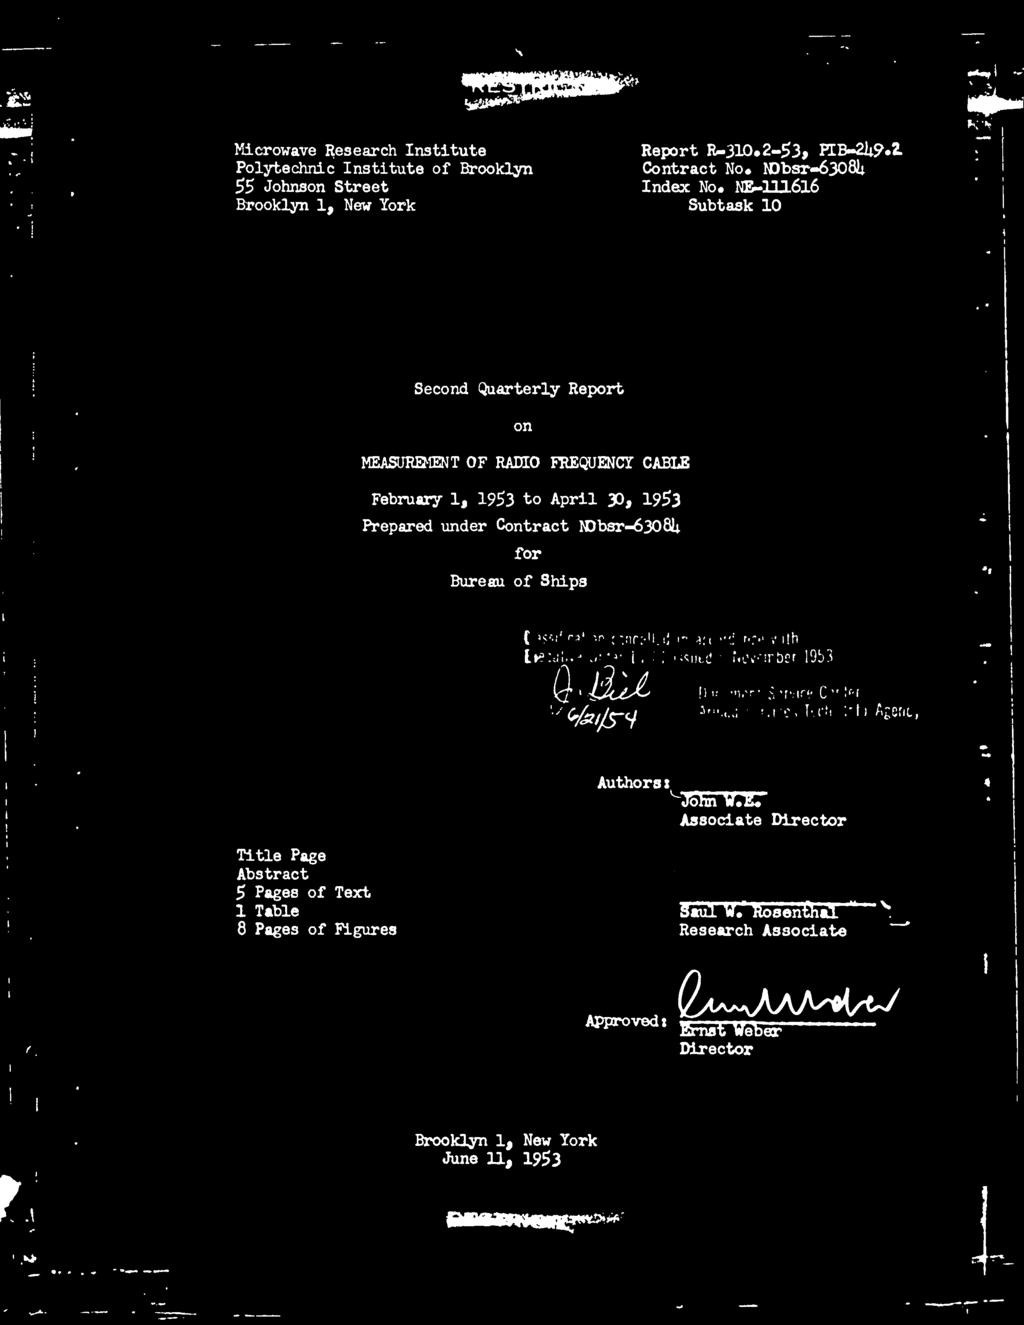 NB-lll6l6 Subtask 10 ' Second Quarterly Report on MEASUREMENT OF RADIO FREQUENCY CABLE February 1, 1953 to April 30, 1953 Prepared under Contract N3bsr-^308l4.